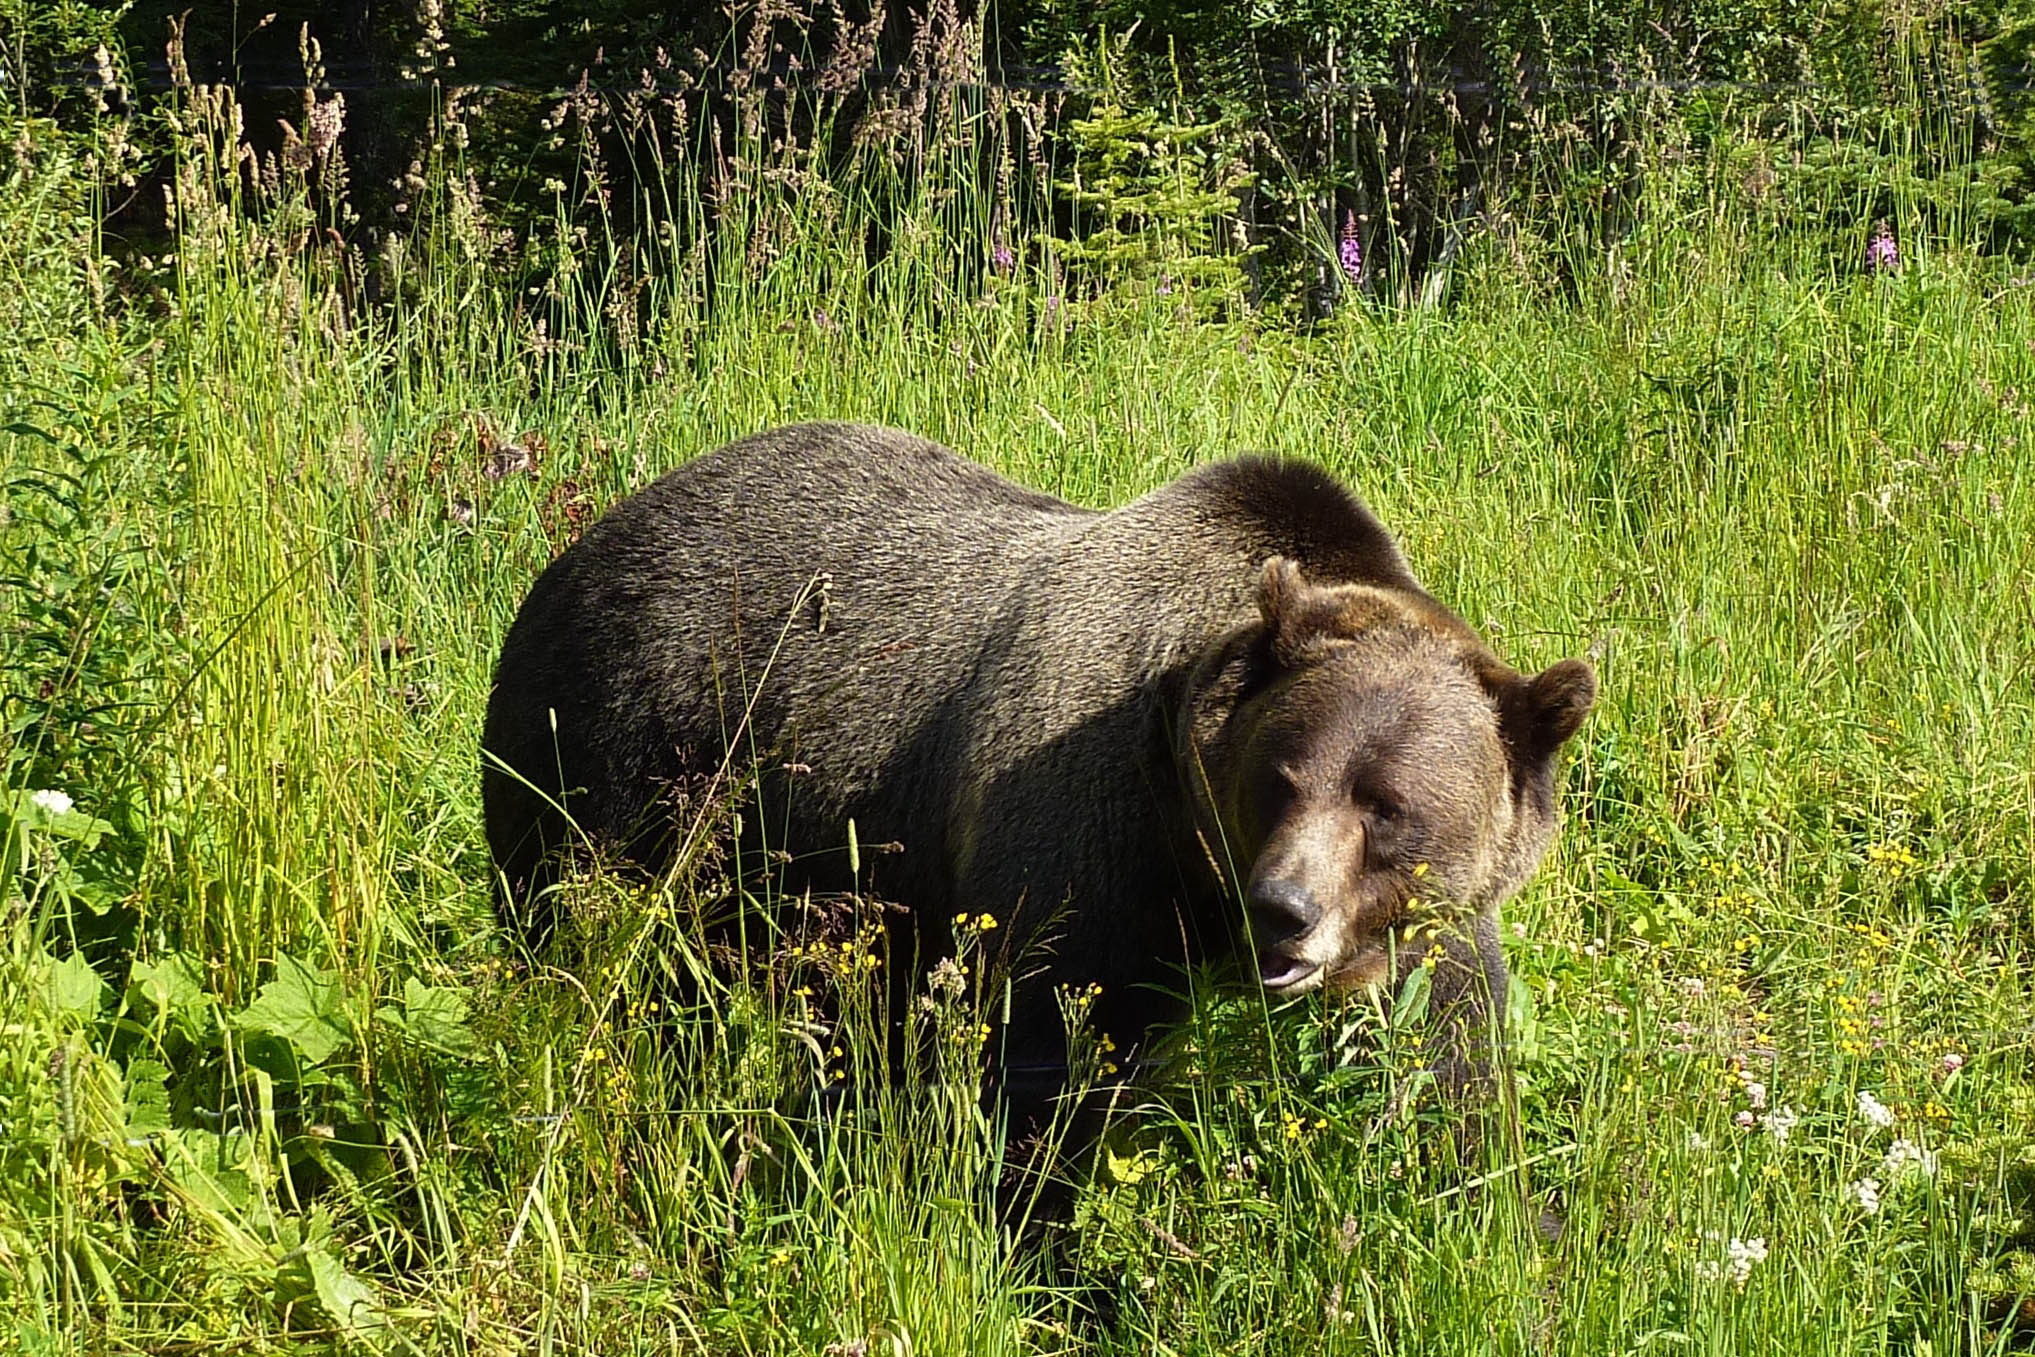 Grizzly bear in grass eating a piece of grass